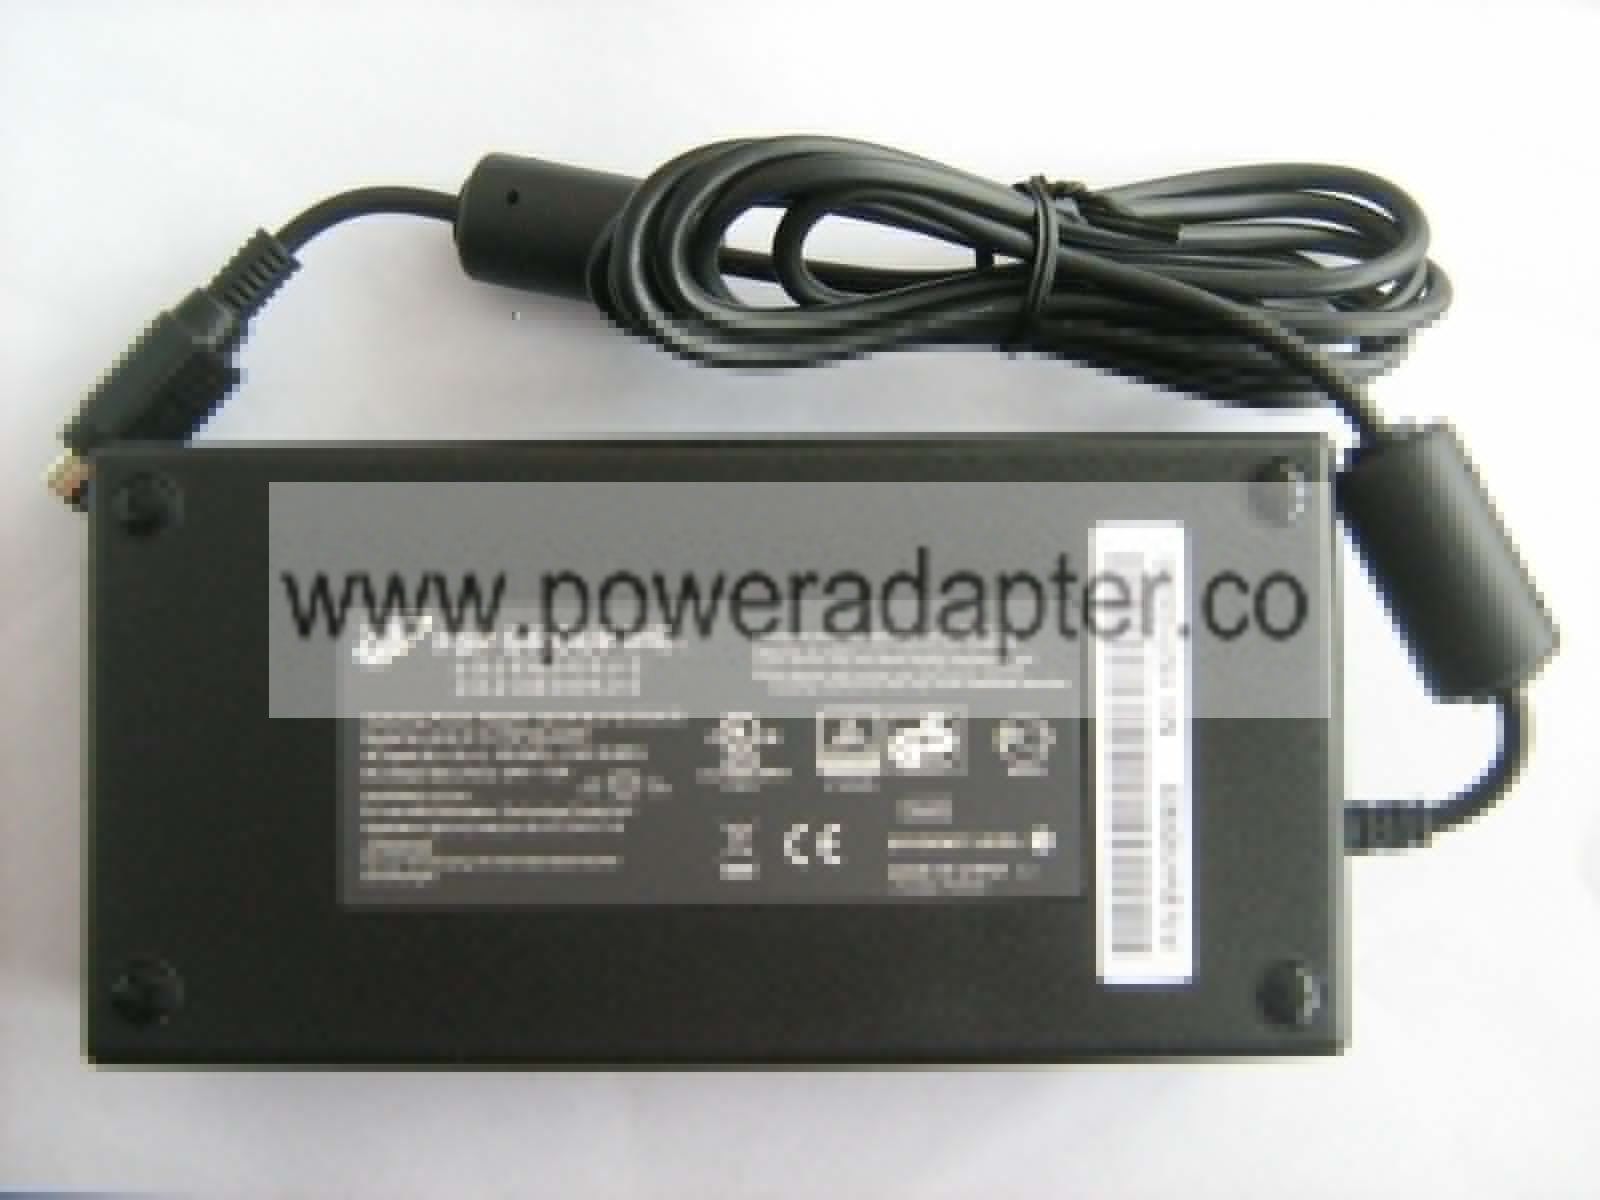 Genuine FSP FSP180-AAAN1 180W 24V 7.5A Power Supply AC DC Adapter FSP180-AAA Country/Region of Manufacture: China Ou - Click Image to Close